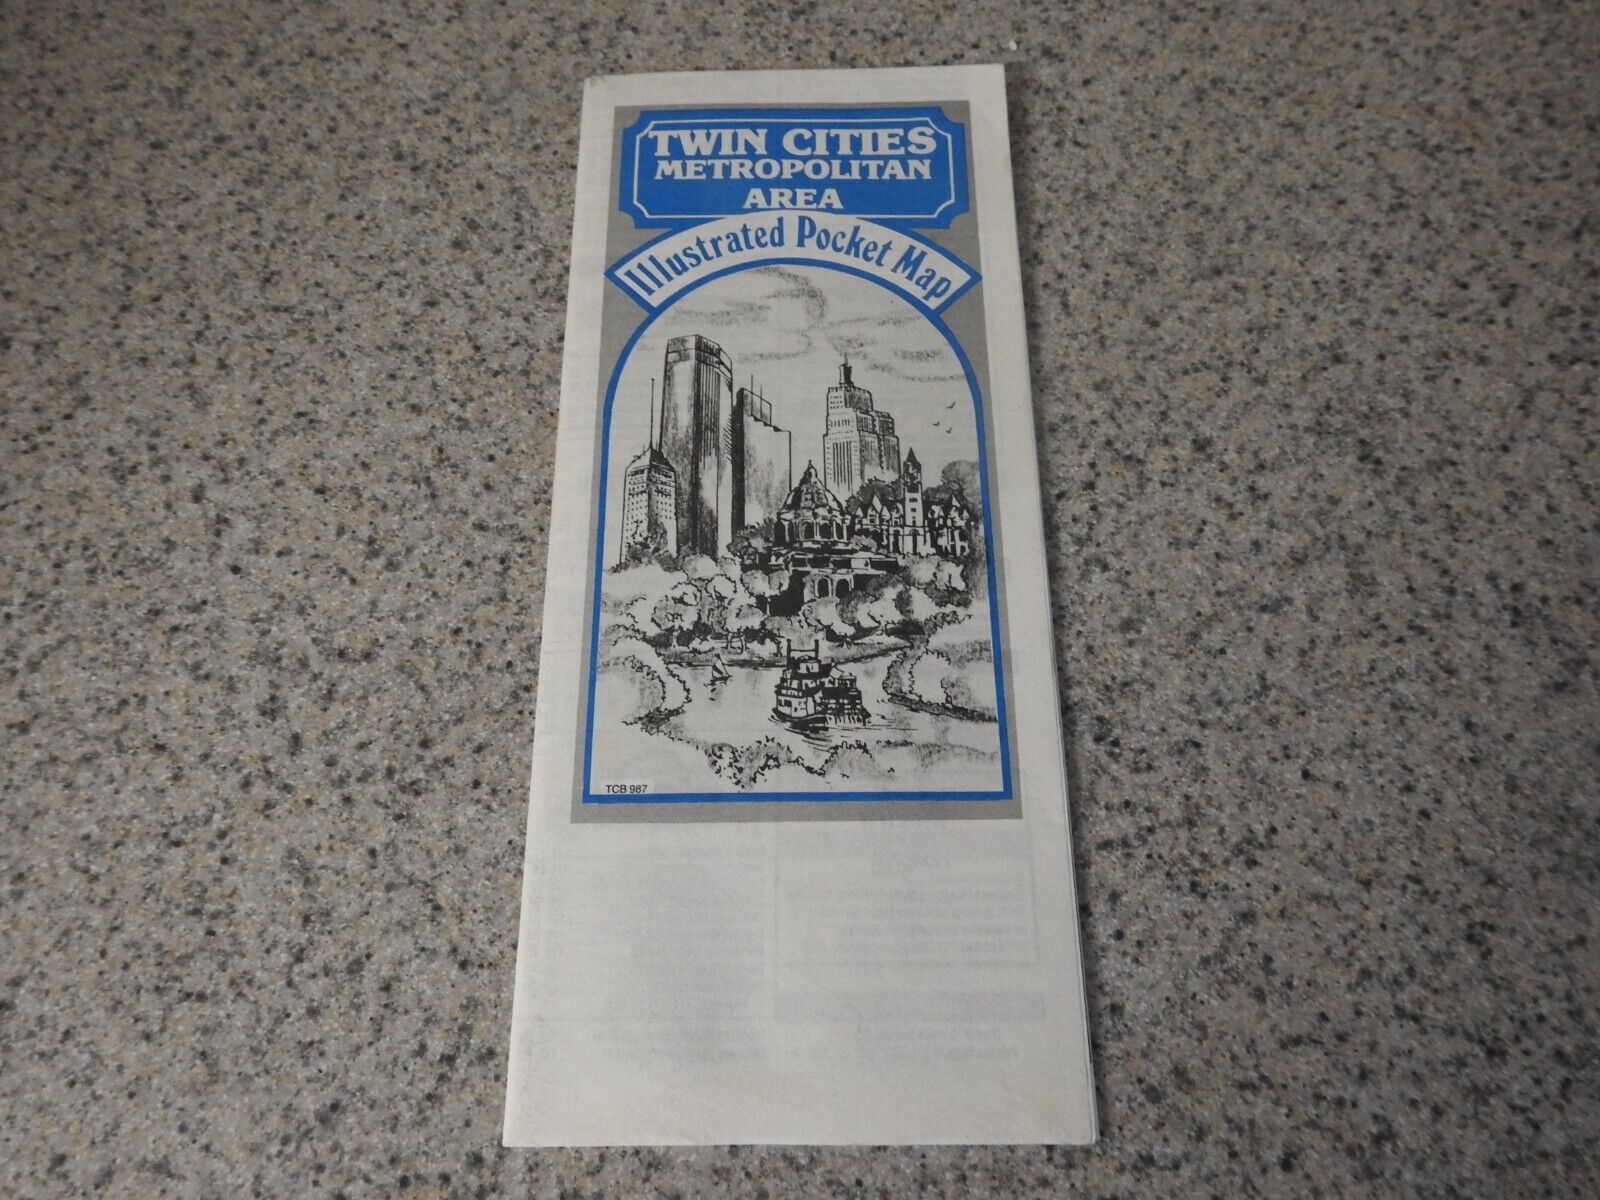 Vintage 1987 Travel Graphics Twin Cities Illustrated Pocket Map Minneapolis